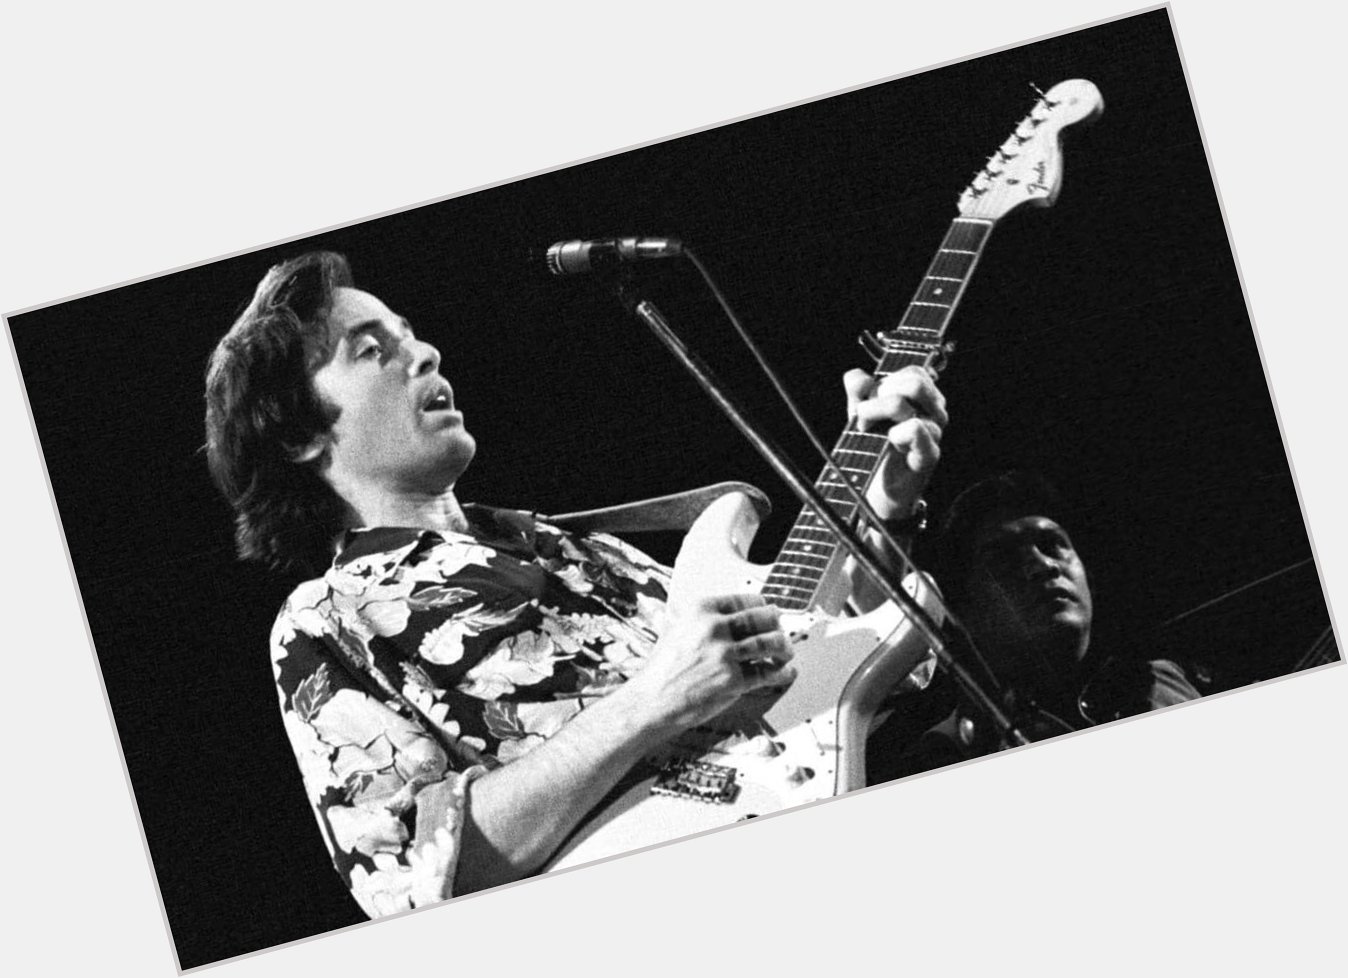 Happy Birthday Mr Ry Cooder  The musician-composer was born
on 15th march1947 in Los Angeles. 